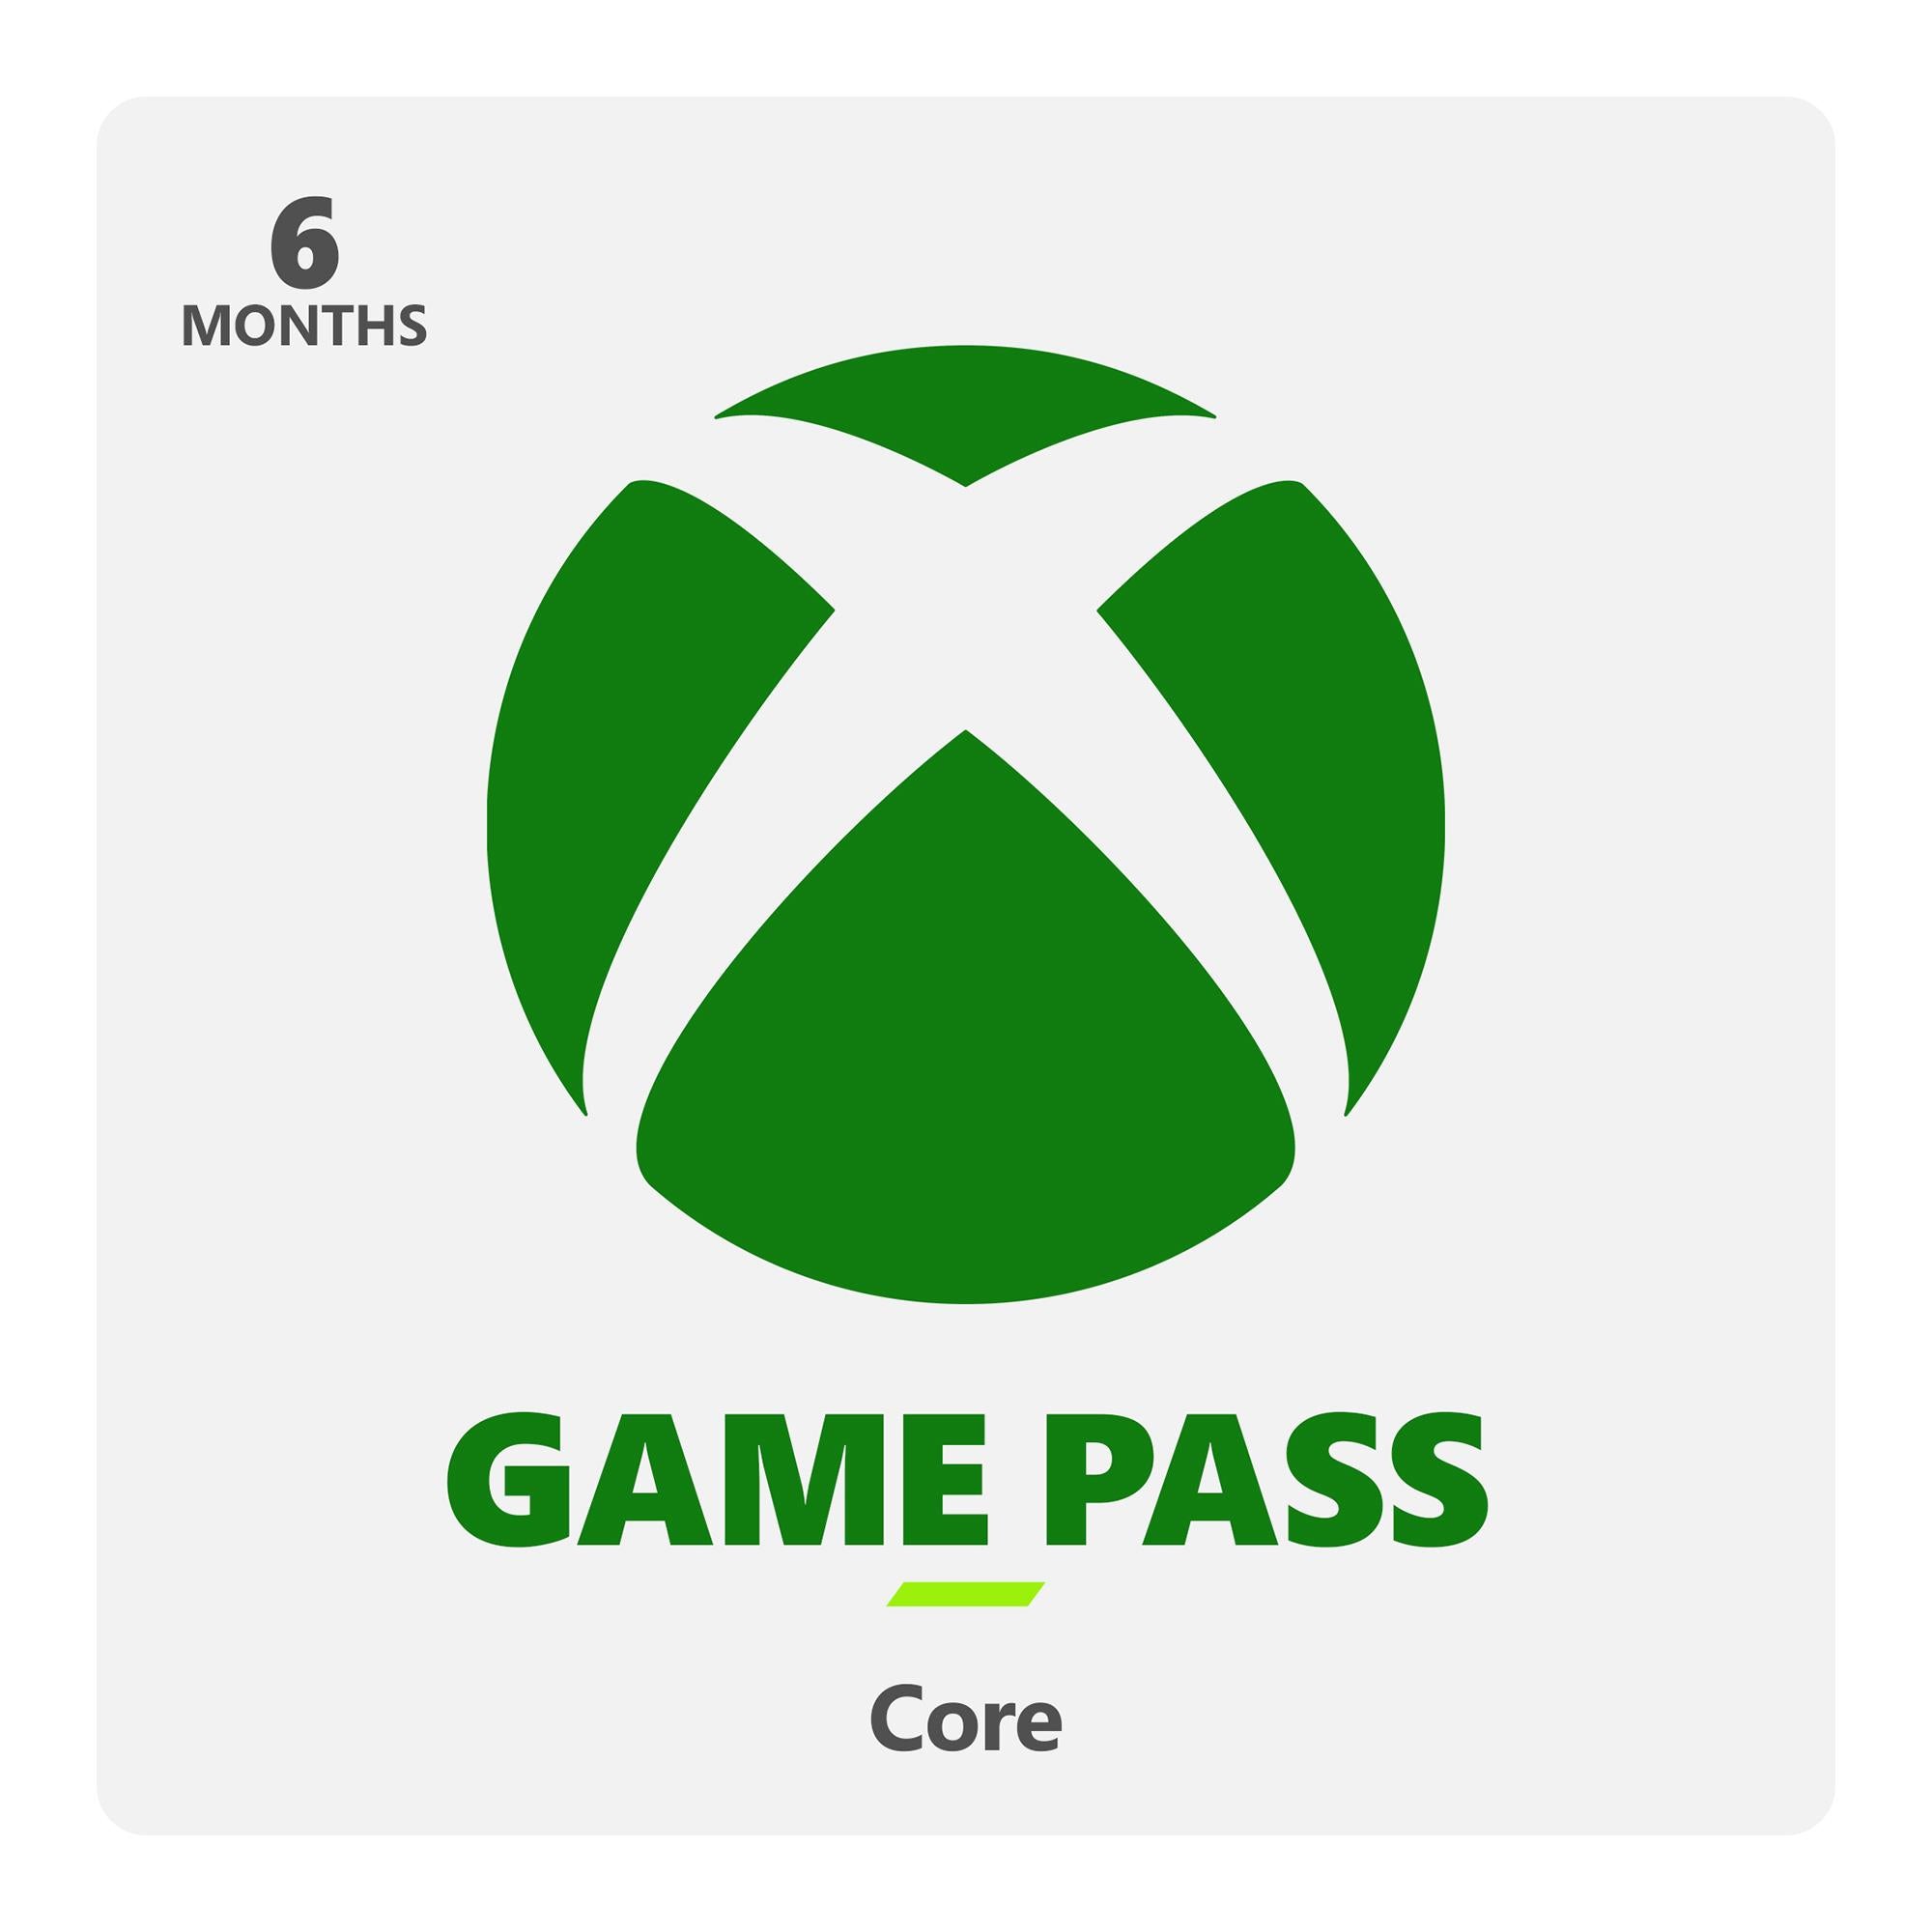 xbox game pass core 6 month subscription (digital download)